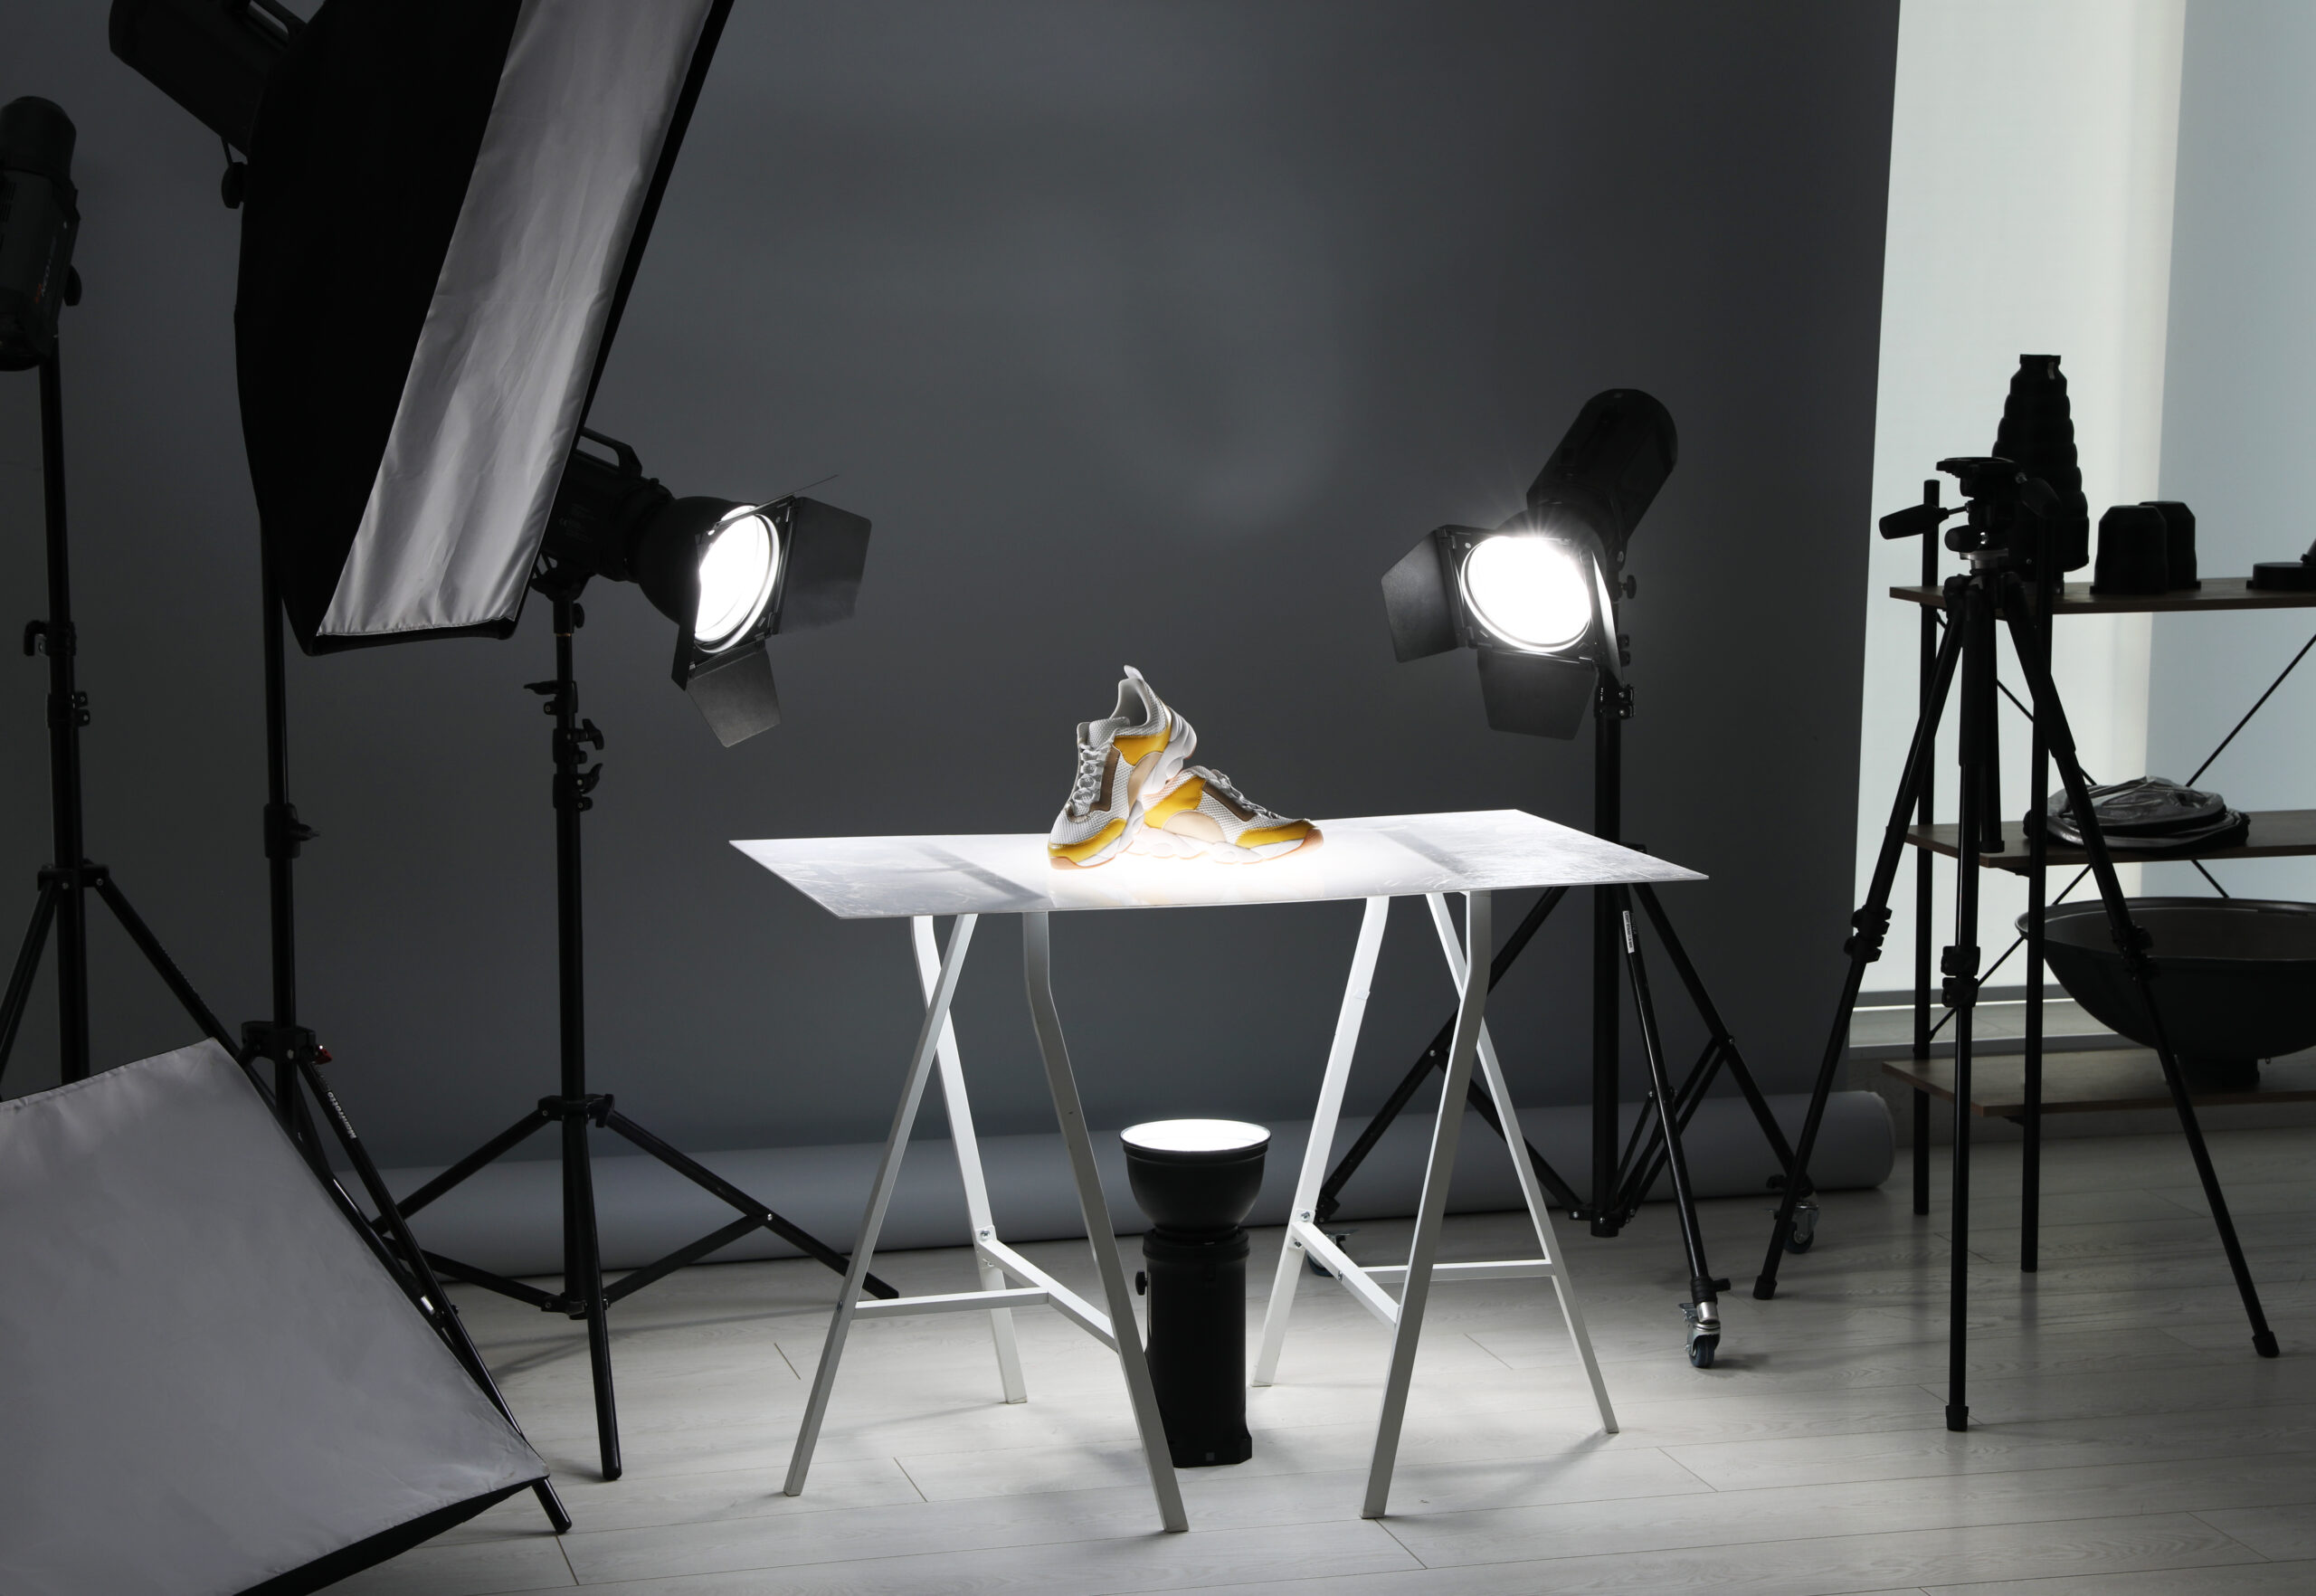 Professional photography equipment prepared for shooting stylish shoes in studio - Product Photography